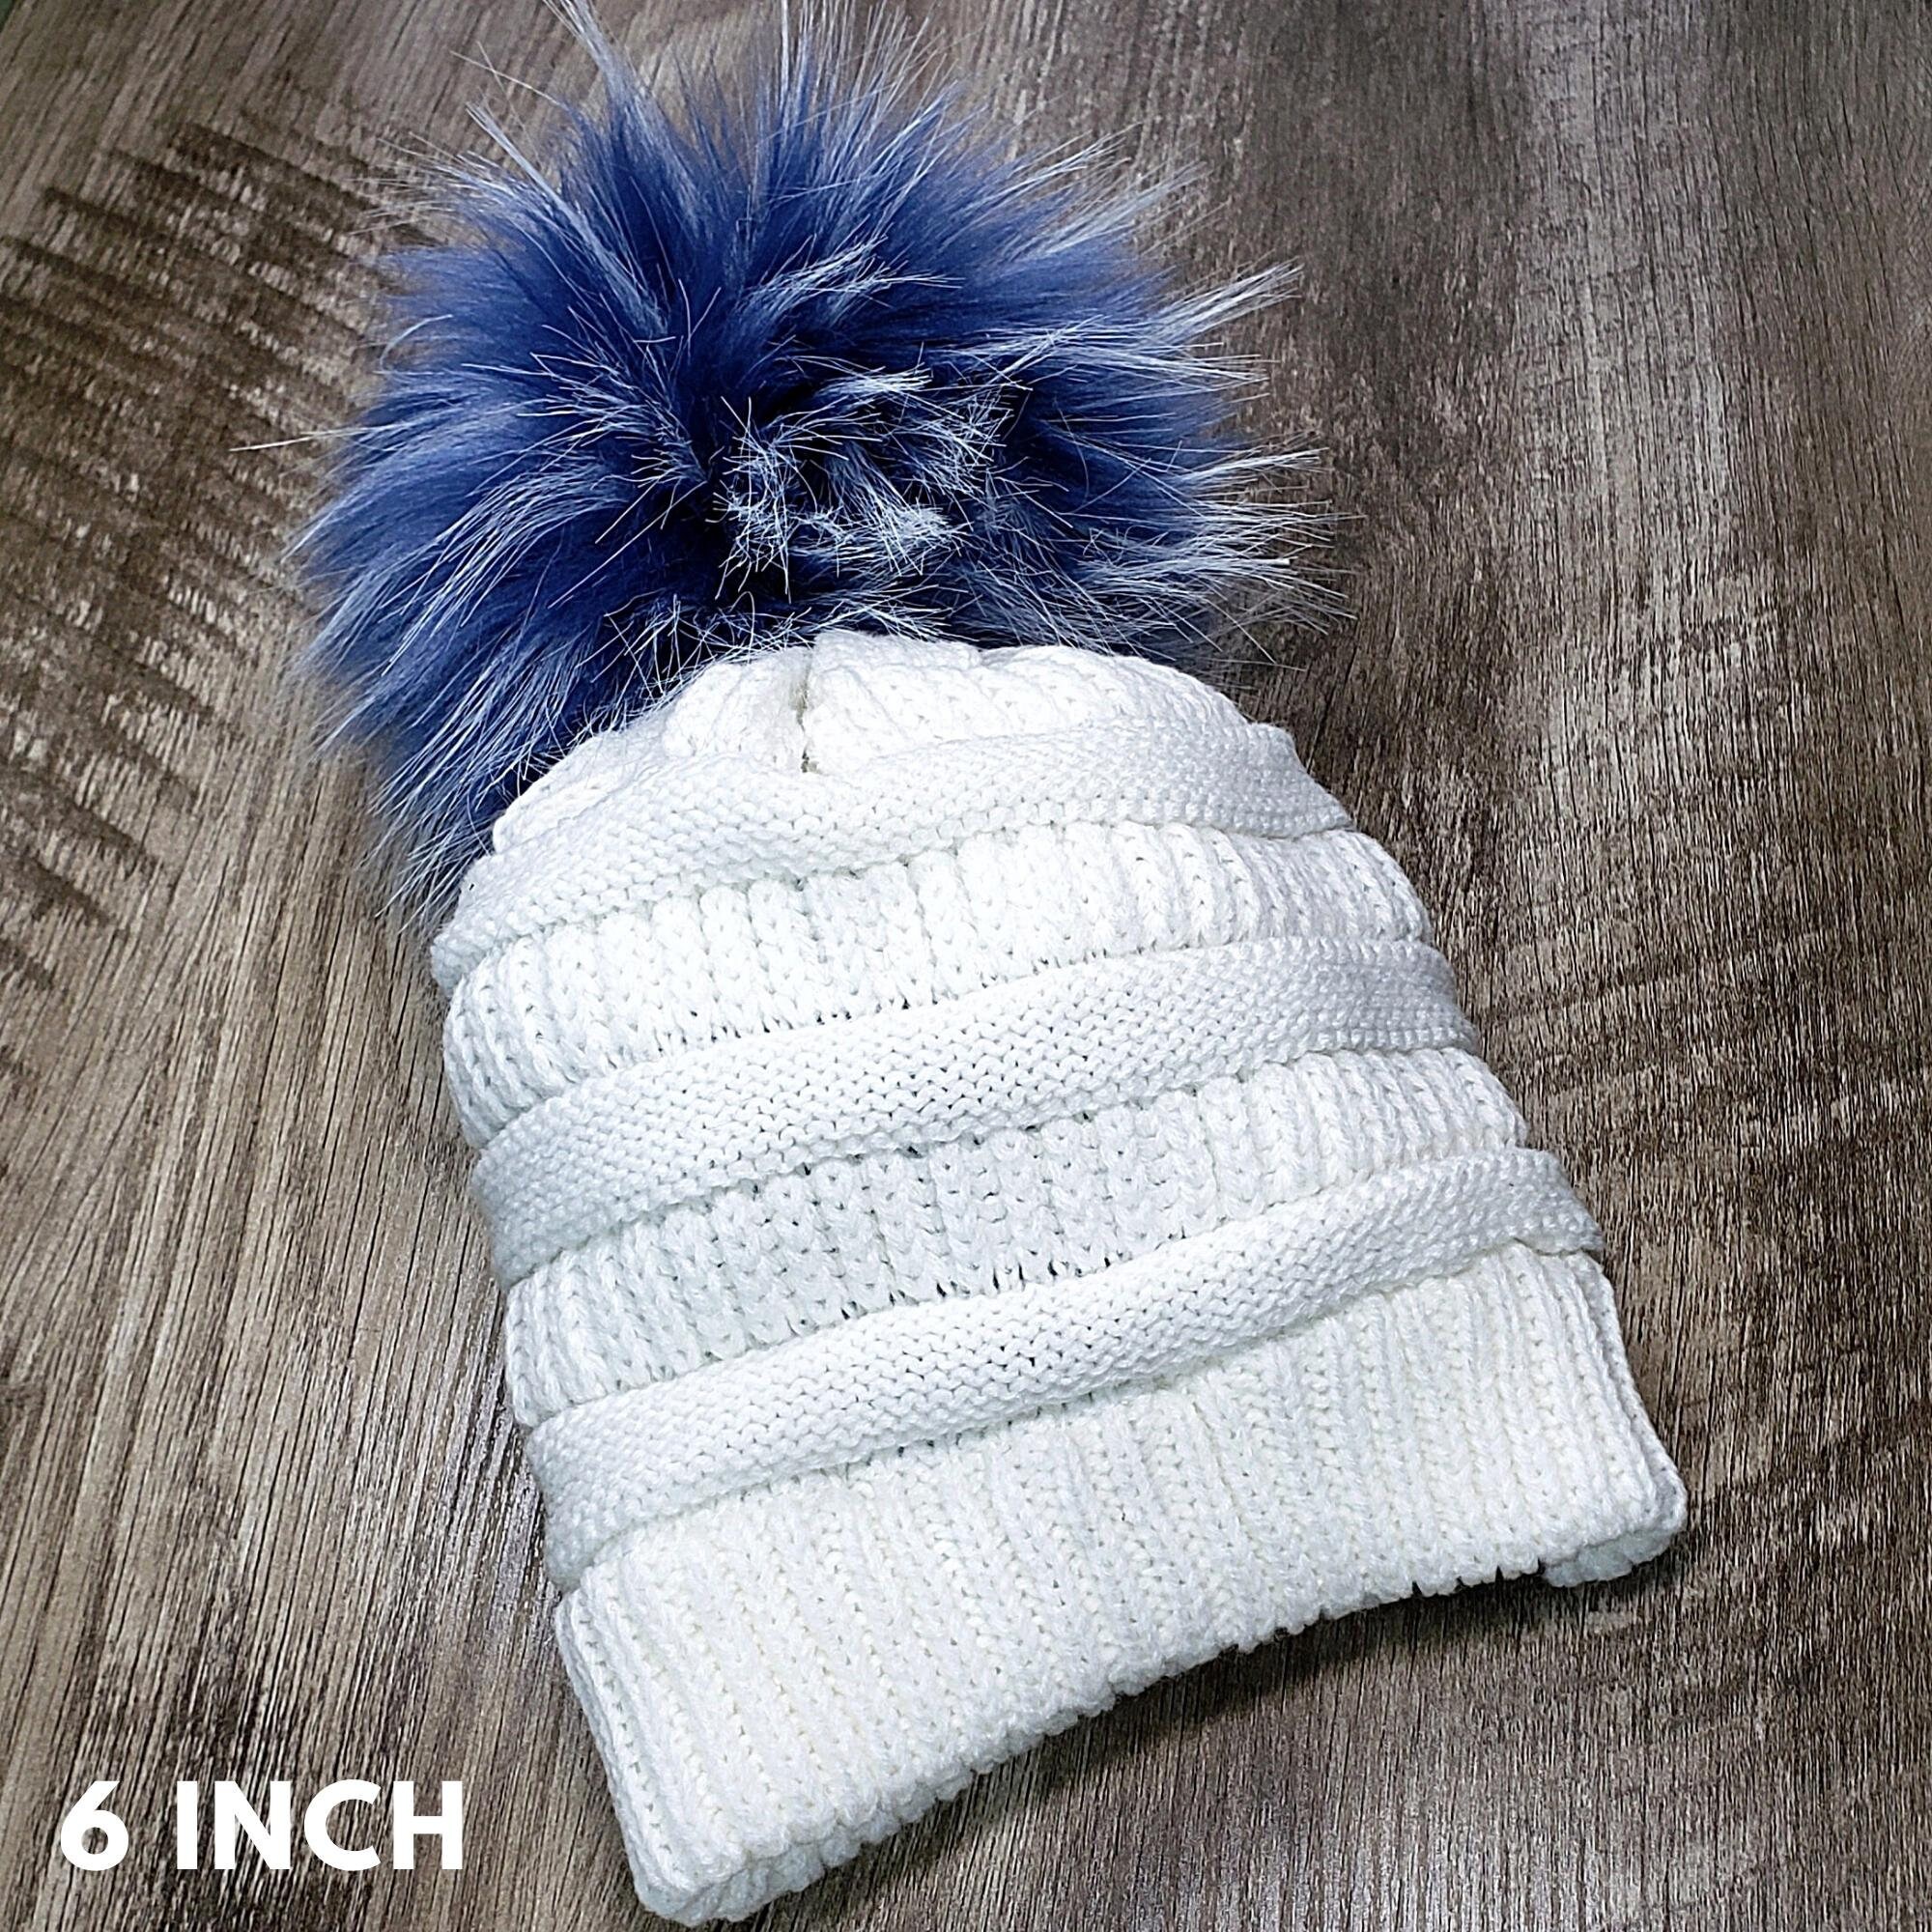 Spiked Faux Fur Blue Pom Pom for Crafts Speckled Fake Fur Poms for Crochet  Hats, Beanies and Scarfs Two Tone Pompom With Loop, Snap or Ties 